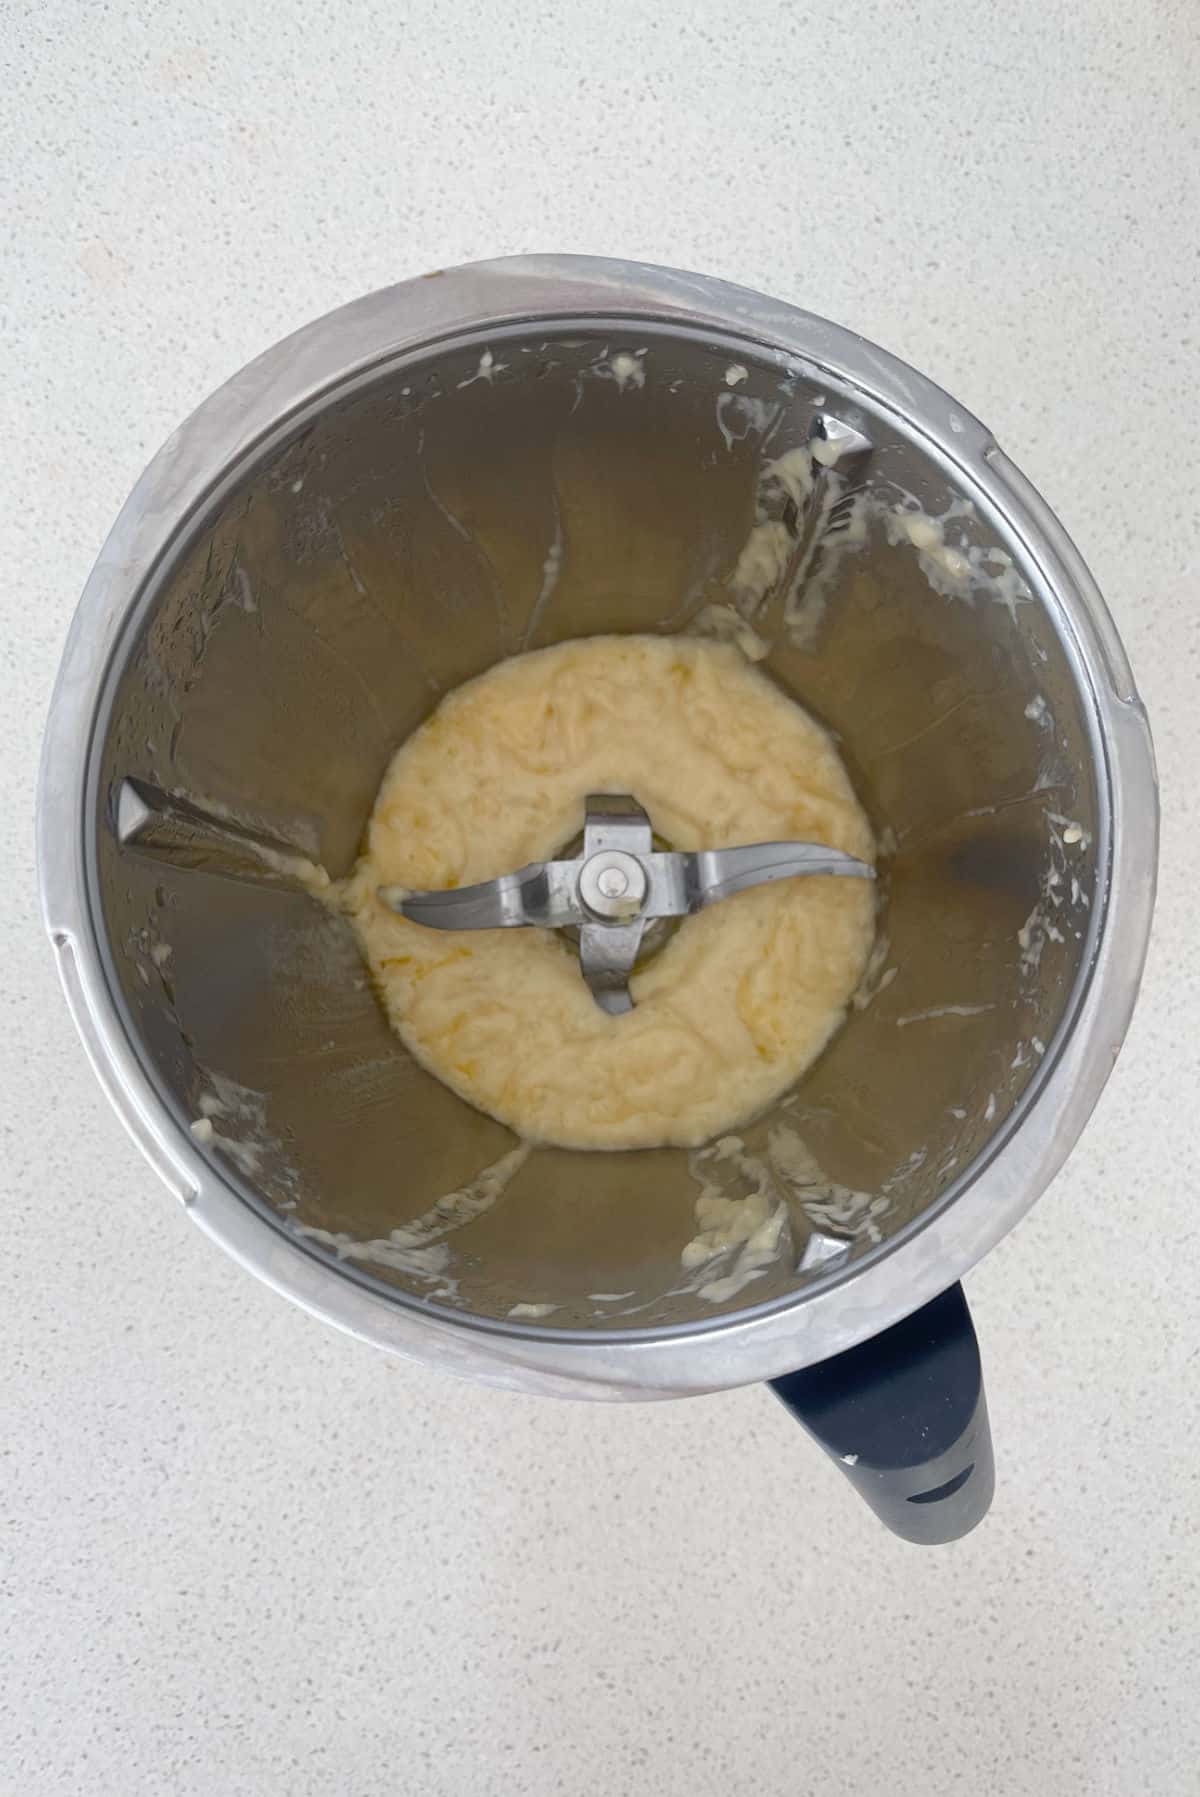 Combined banana, vanilla extract, eggs and butter in a thermomix bowl.